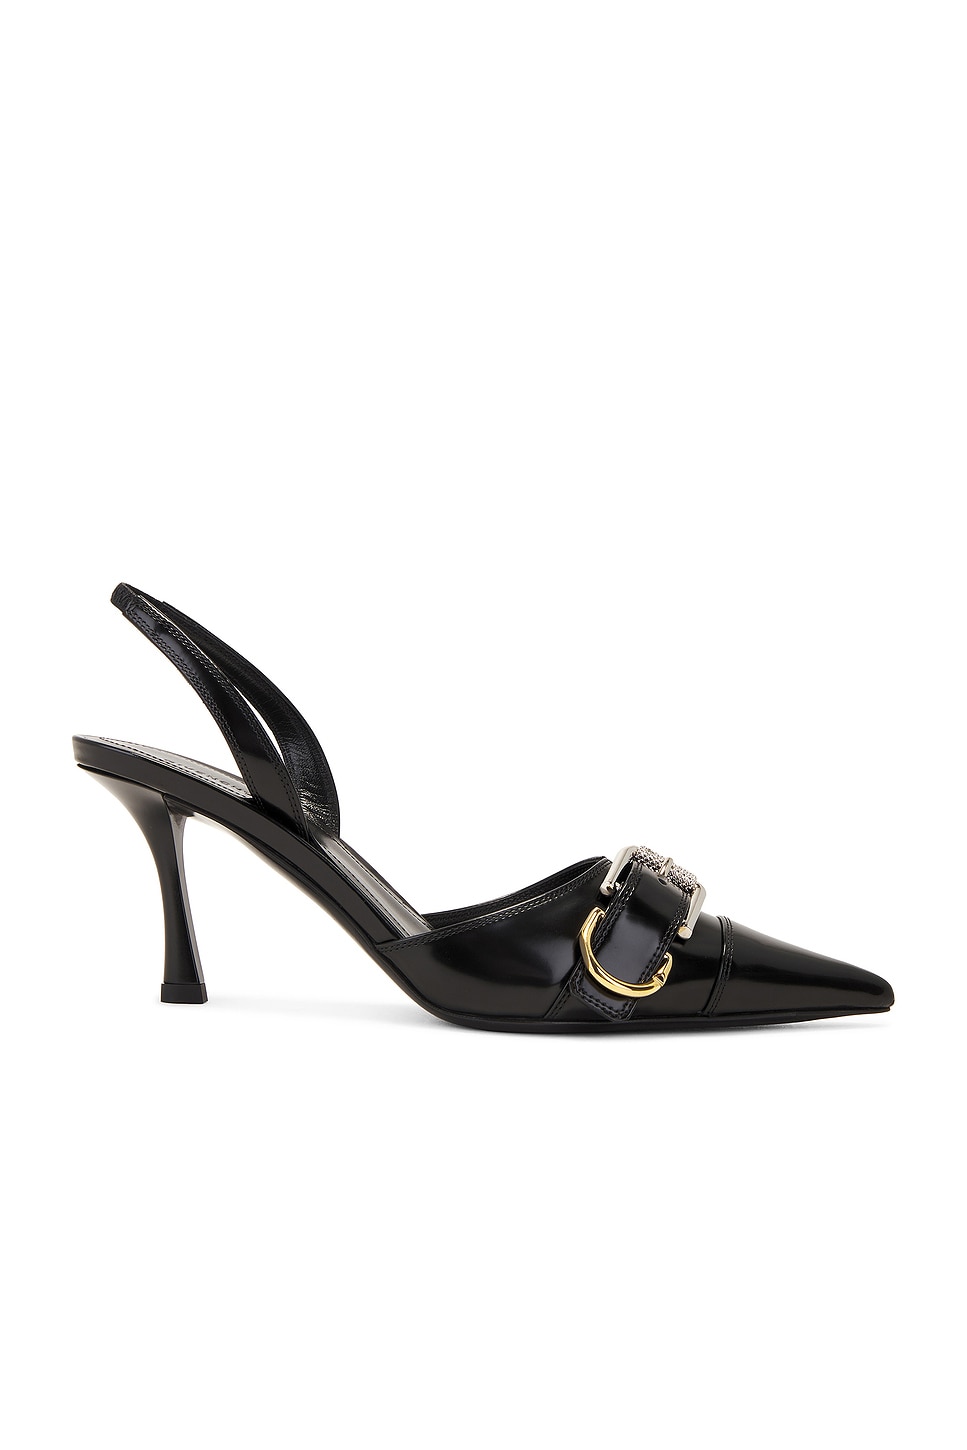 Image 1 of Givenchy Voyou Slingback Pump in Black